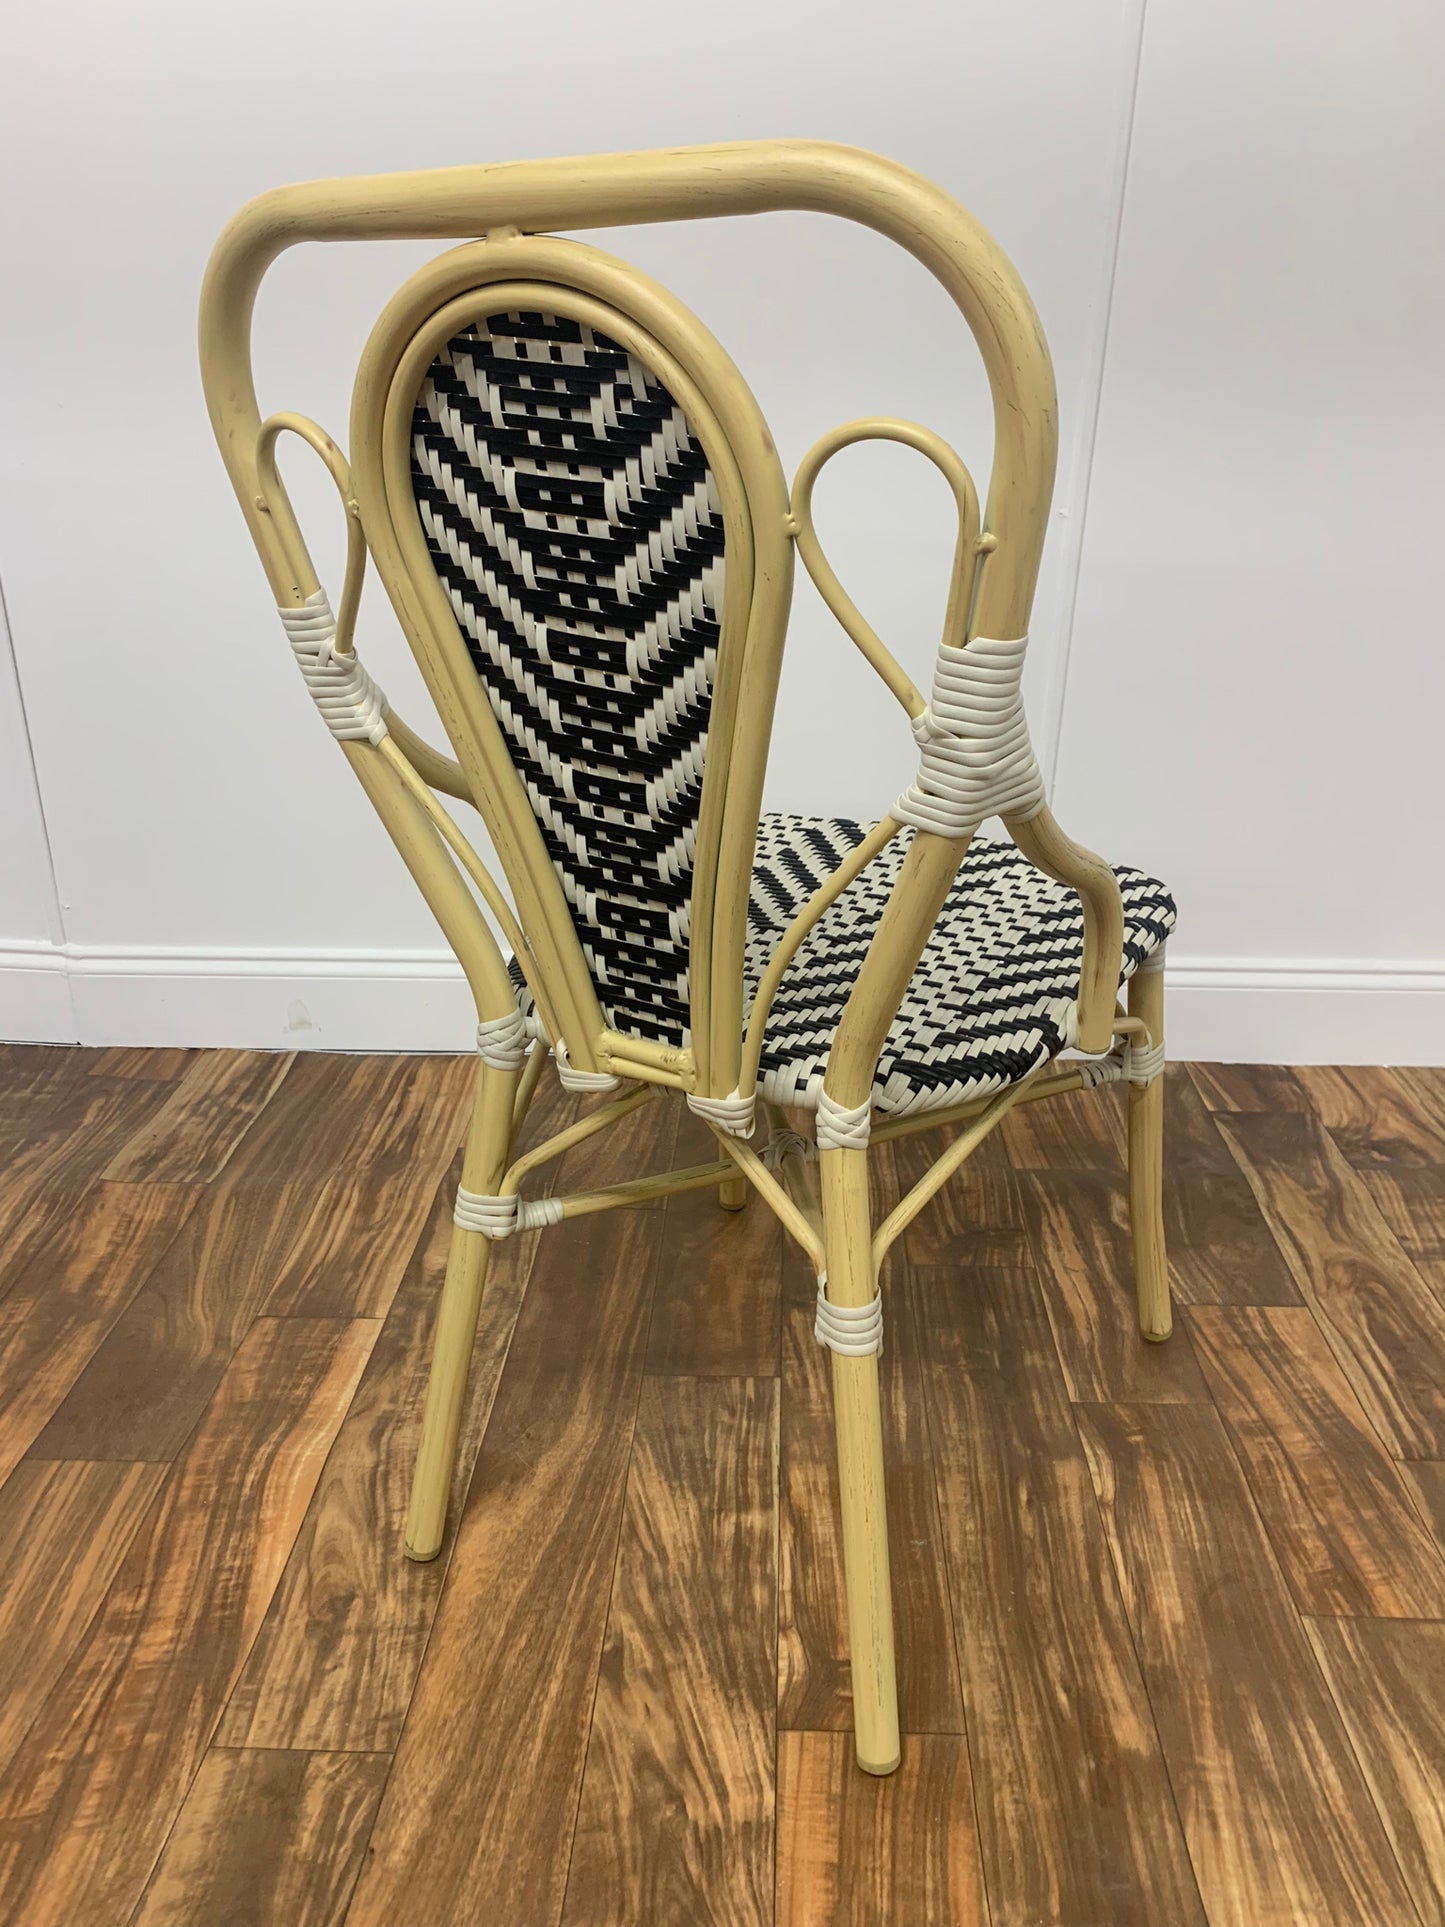 BLACK AND WHITE WICKER RATTAN DINING BISTRO CHAIR